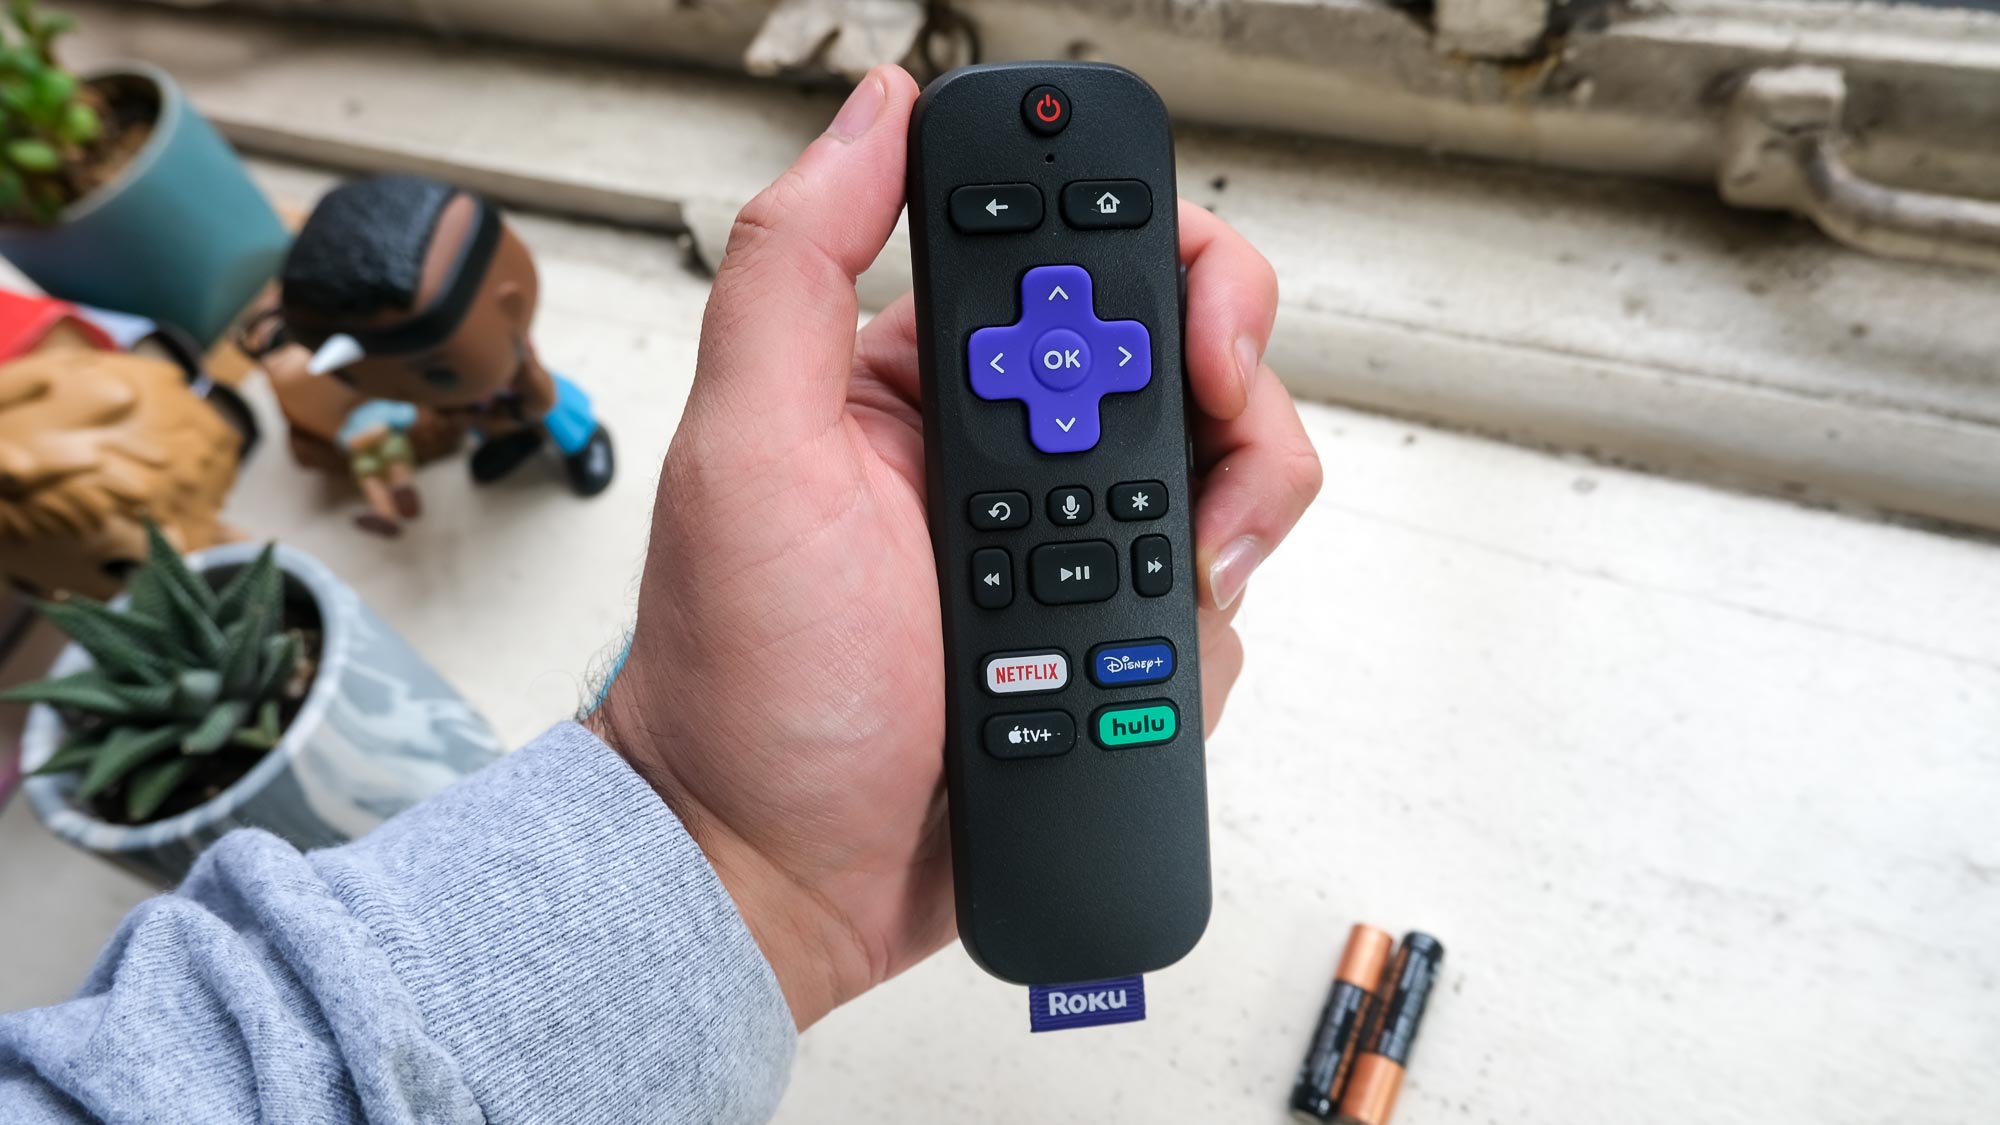 Resetting the remote itself